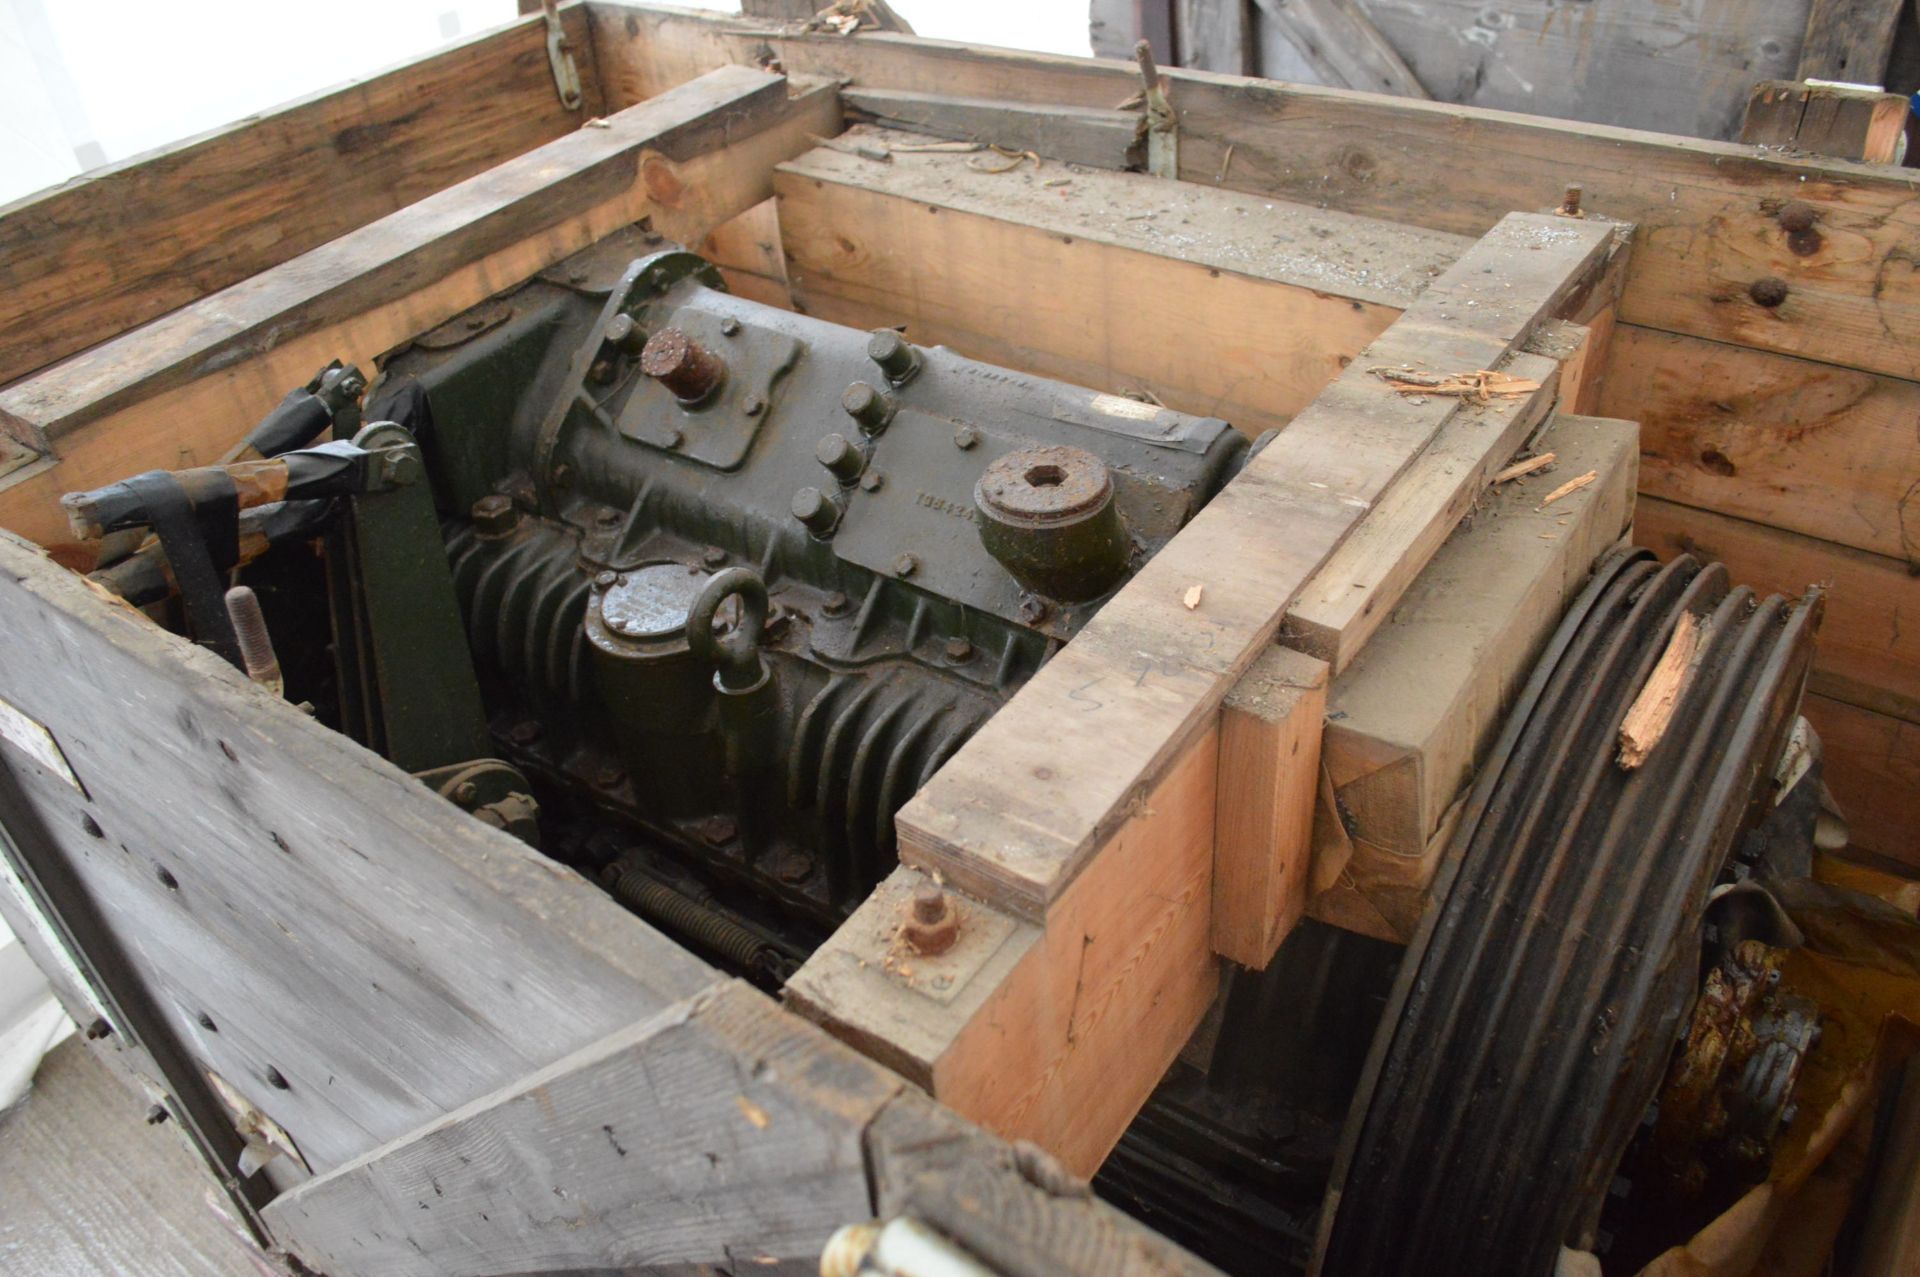 Centurion Gear Box (understood to be reconditioned